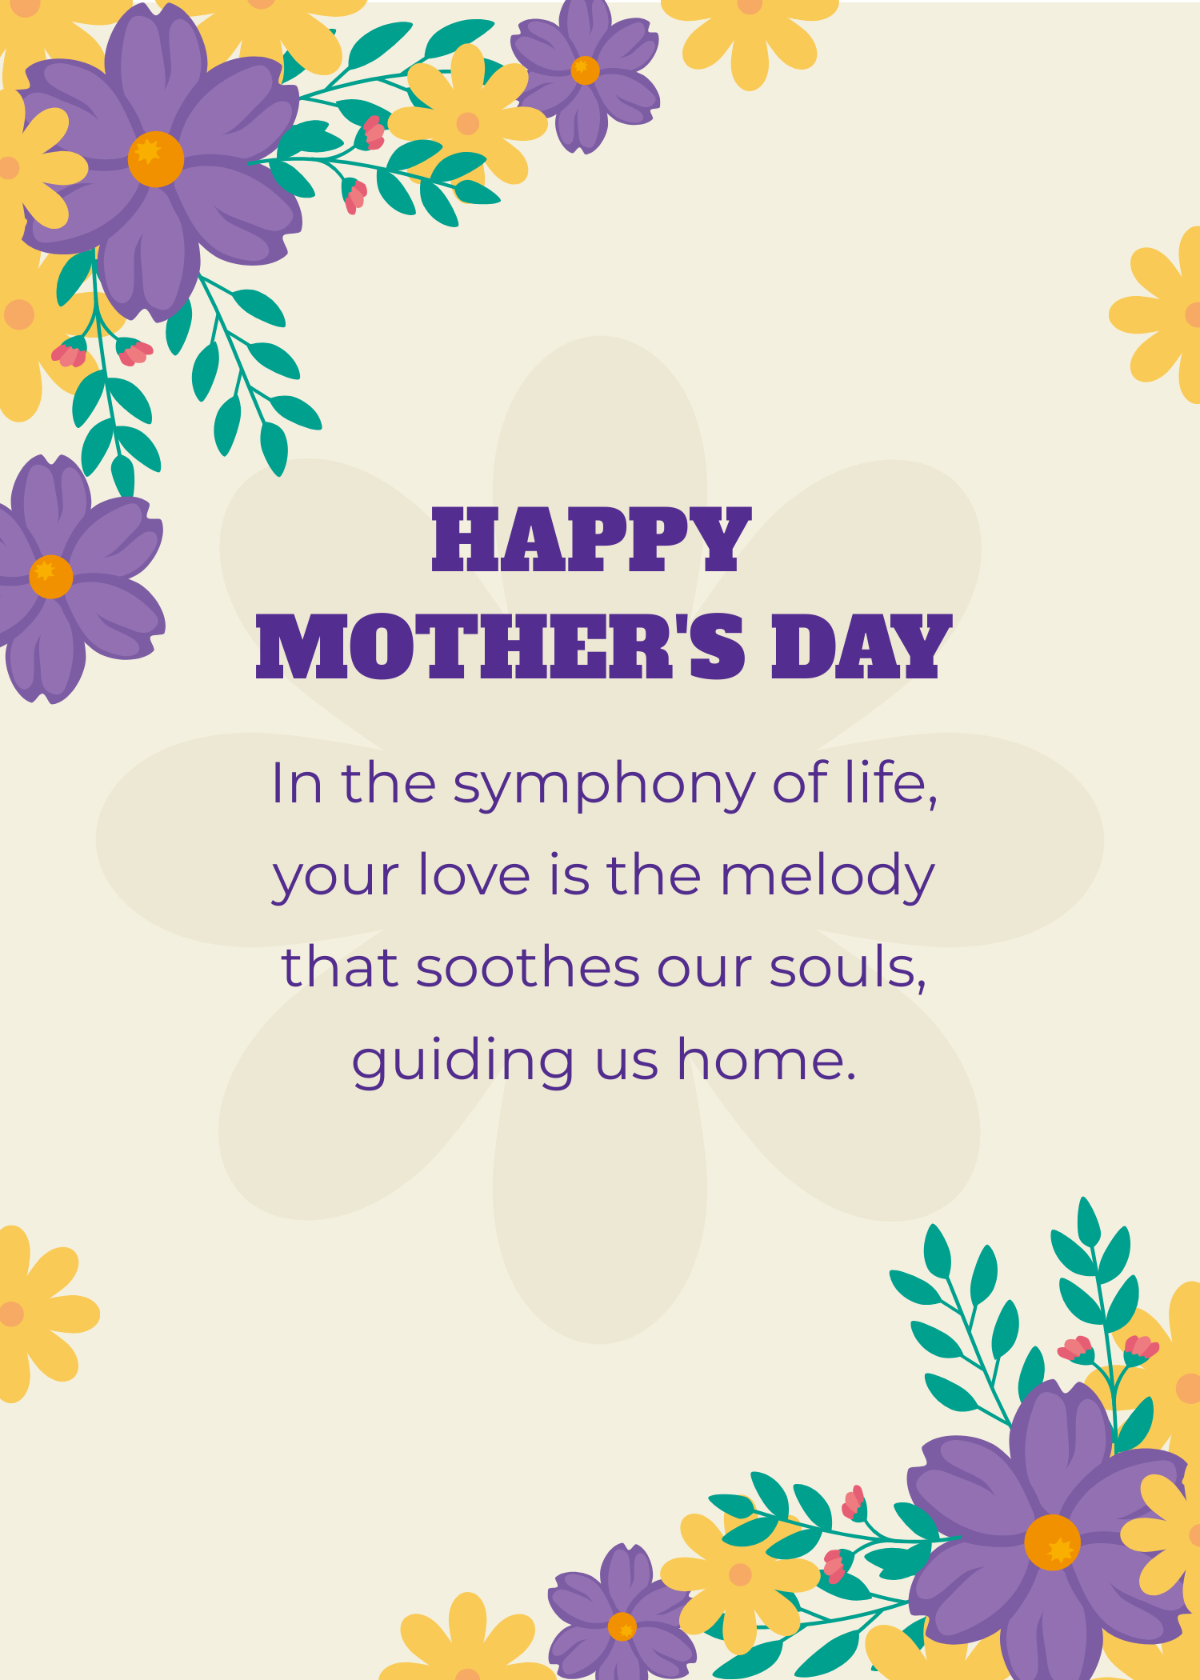 Mother's Day Greeting Message Template